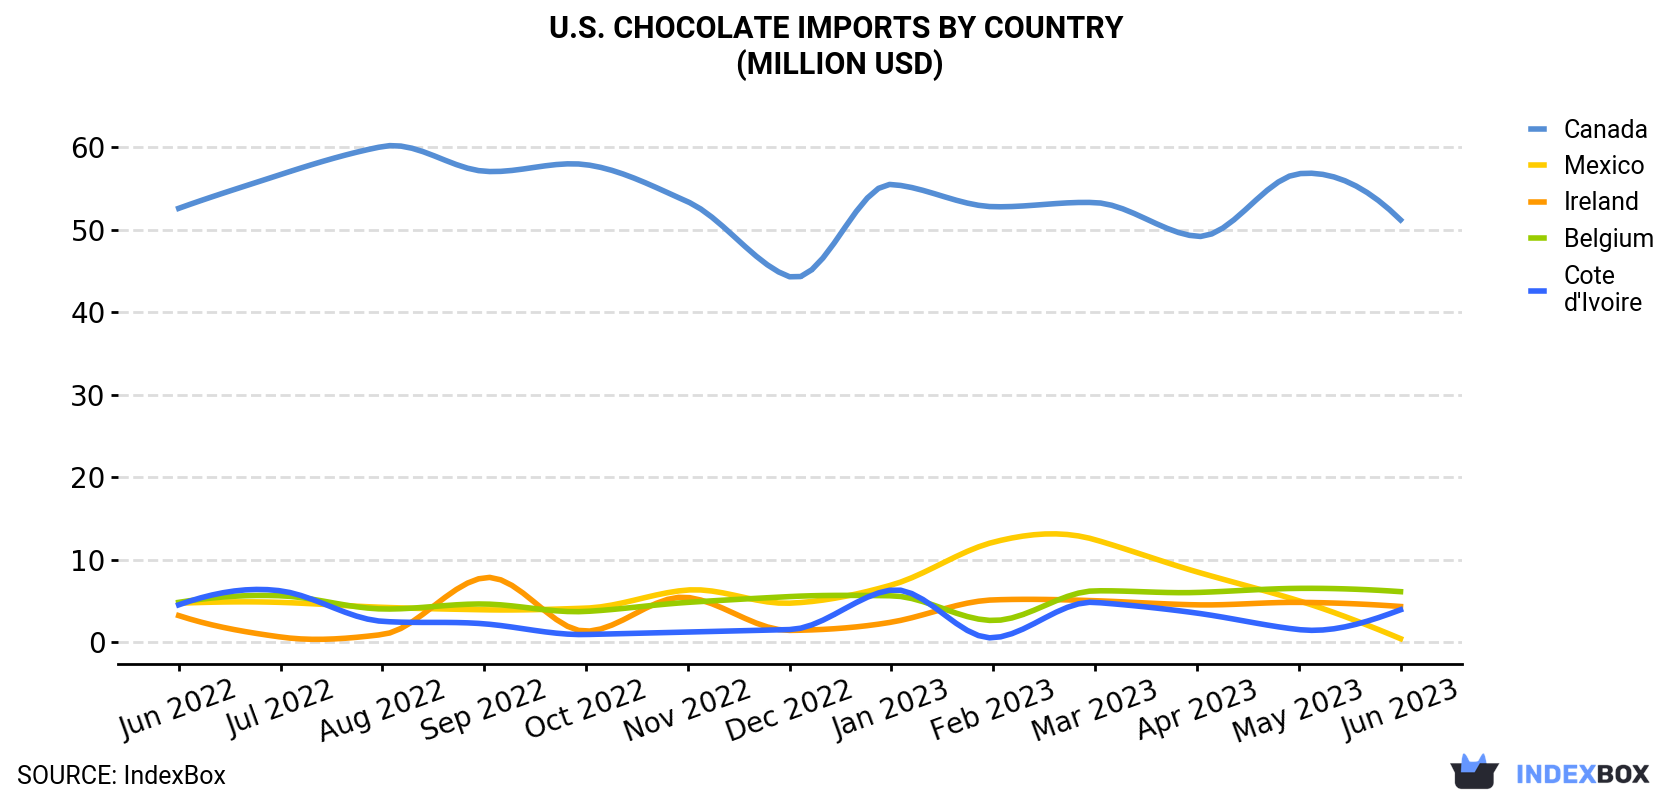 U.S. Chocolate Imports By Country (Million USD)